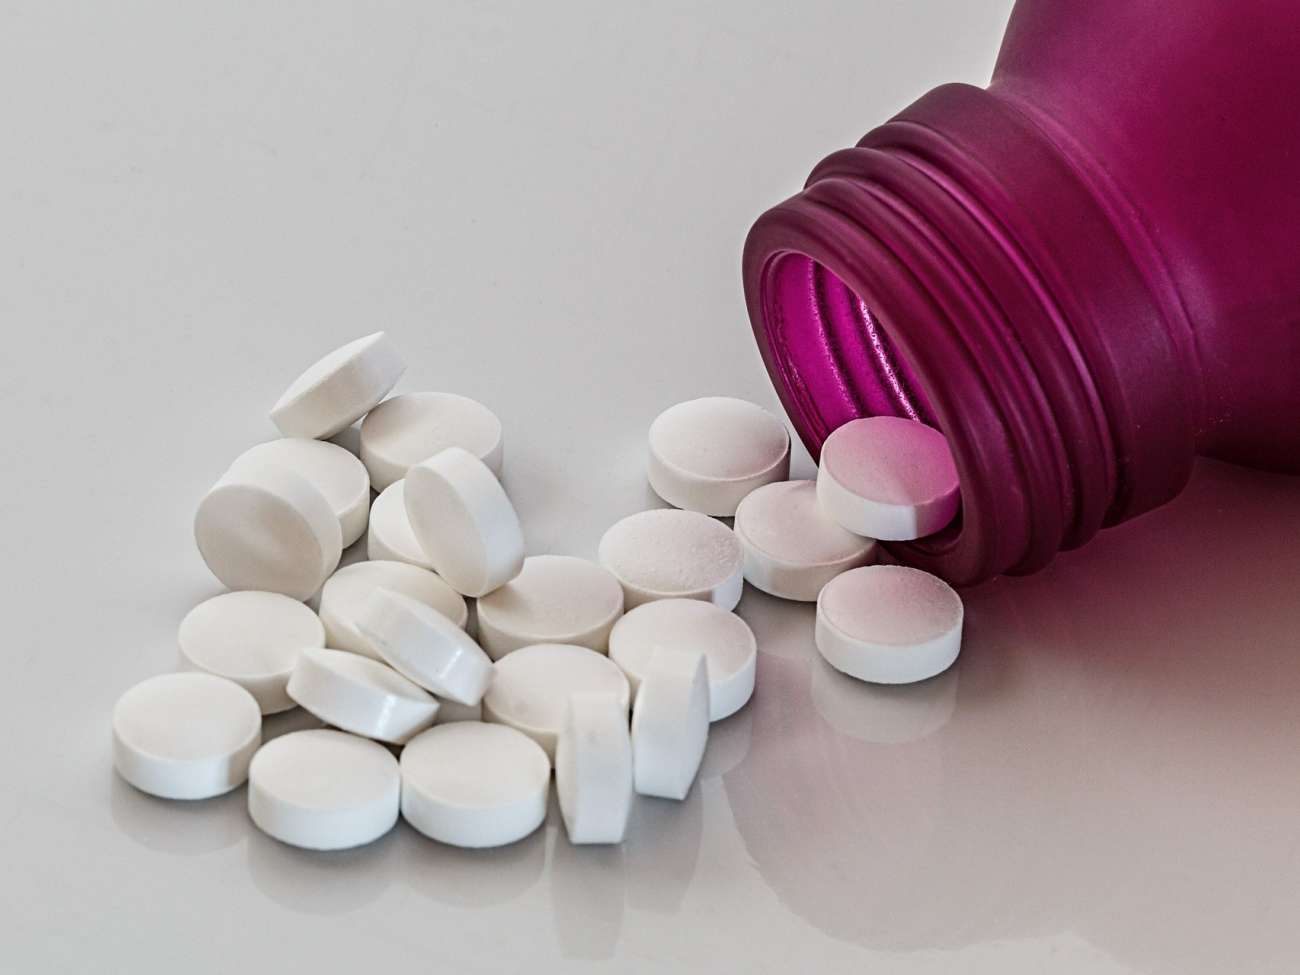 Avoid non-steroidal anti-inflammatory drugs (NSAIDS), which can be harmful to your kidneys.